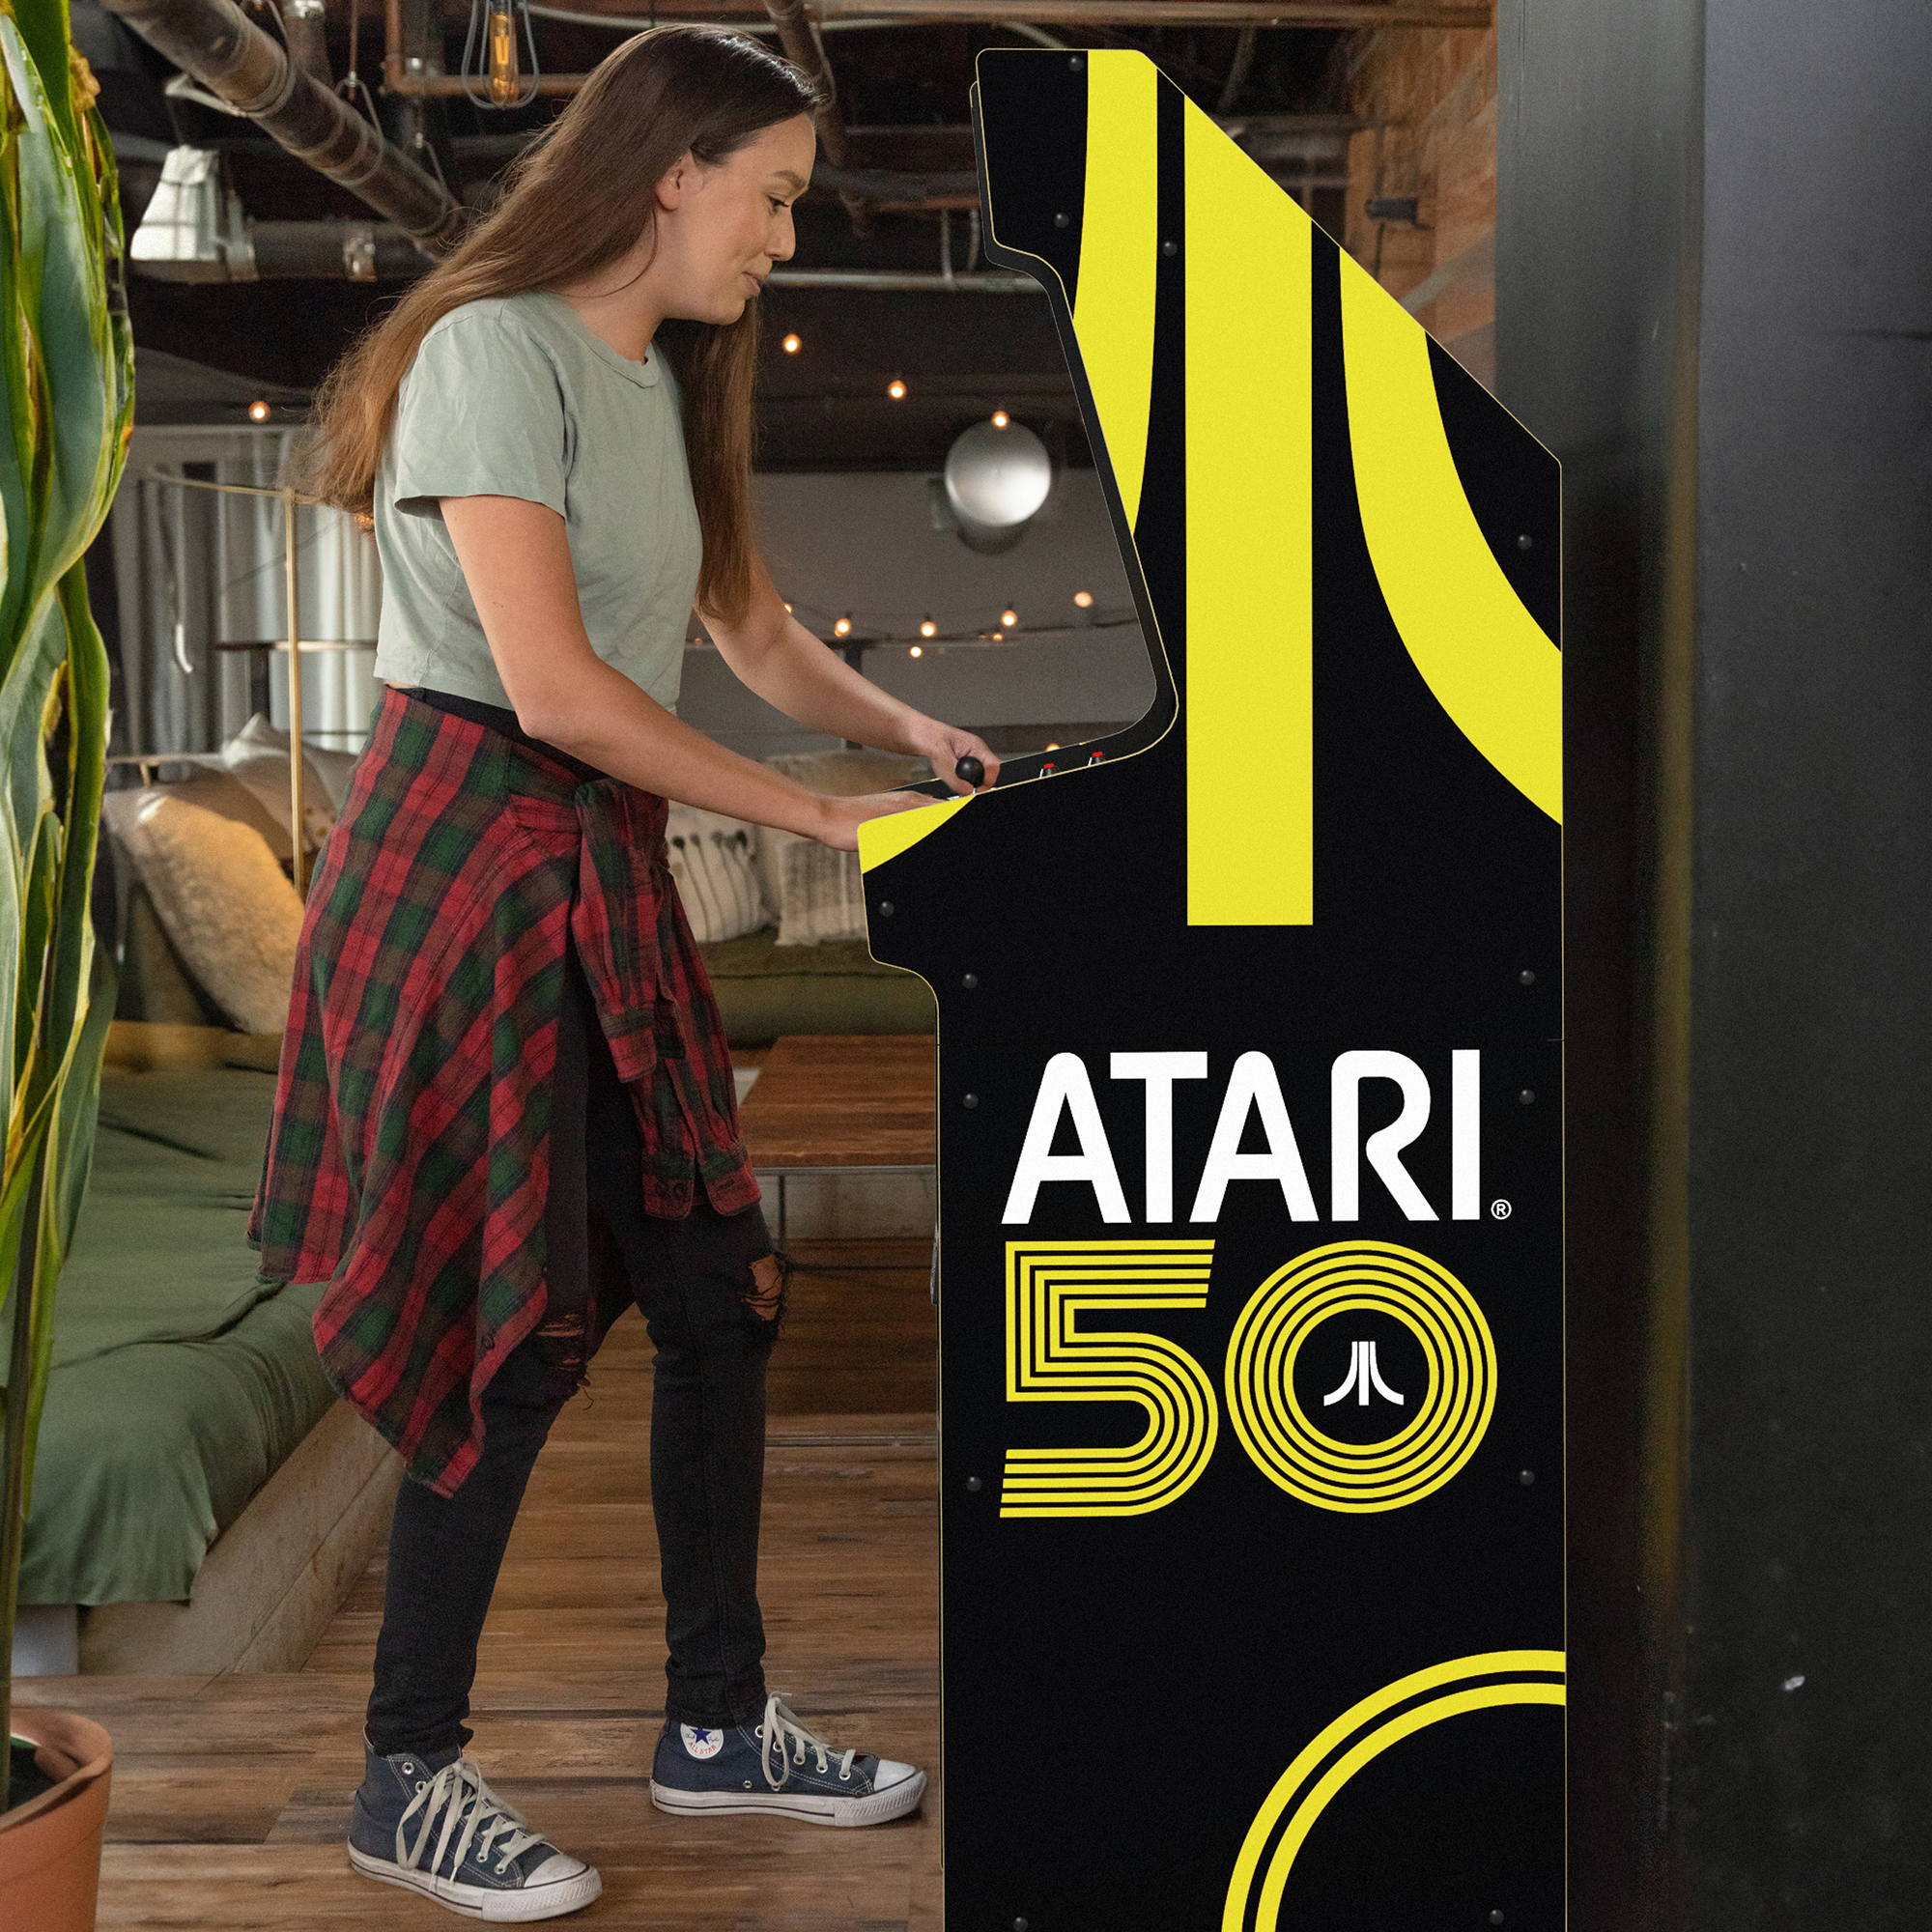 image of a young woman playing the Atari 50th Anniversary Deluxe Machine from Arcade1Up. She and the arcade cabinet are seen from the side; she is wearing grey Converse sneakers and a grey short-sleeved shirt, with a flannel longer-sleeved shirt wrapped around her waist as she plays, and has a slight smile as she focuses on the screen. The side of the cabinet has part of the Atari "Fuji" logo in yellow, and lettering reads "Atari 50."